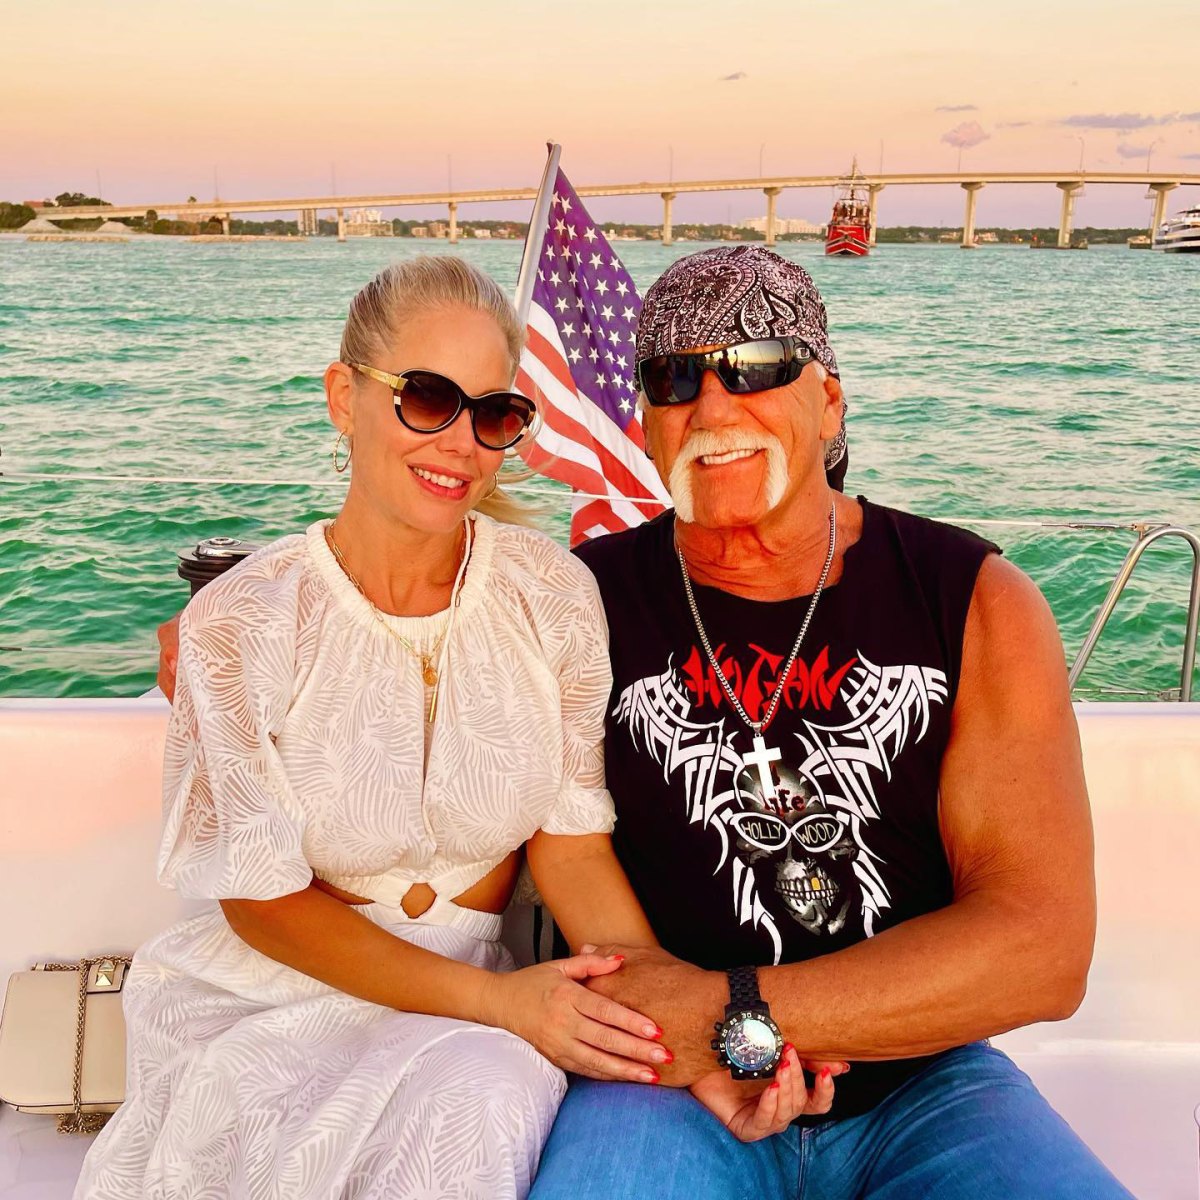 Hulk Hogan Is Engaged to Sky Daily After More Than 1 Year of Dating ...